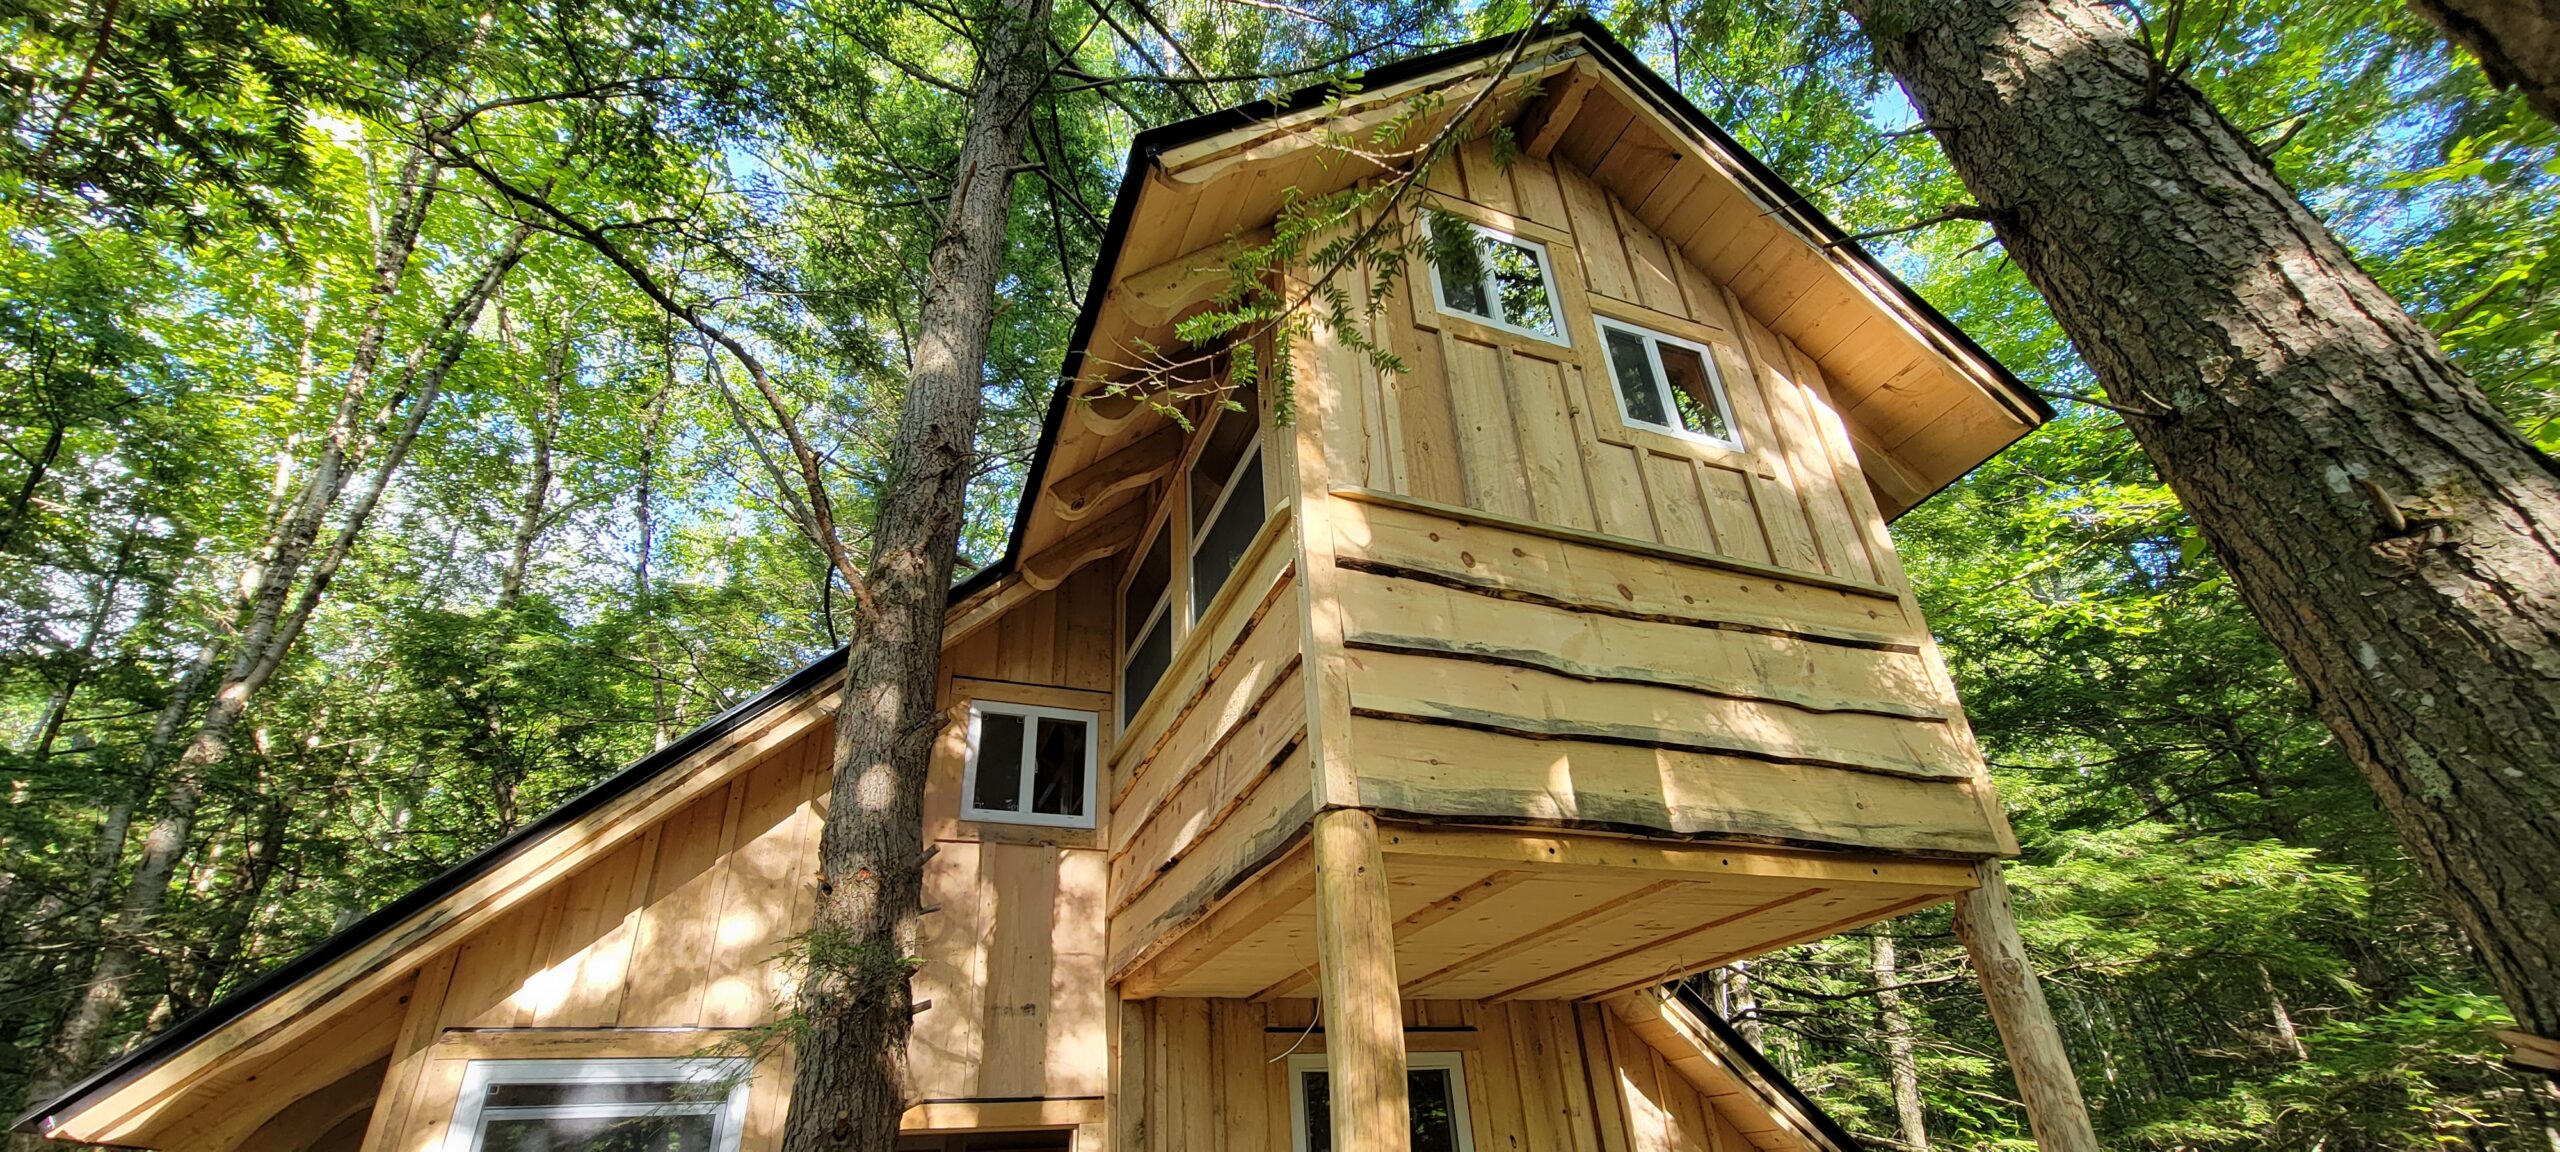 This cozy treehouse sleeping loft creates a covered deck space below.